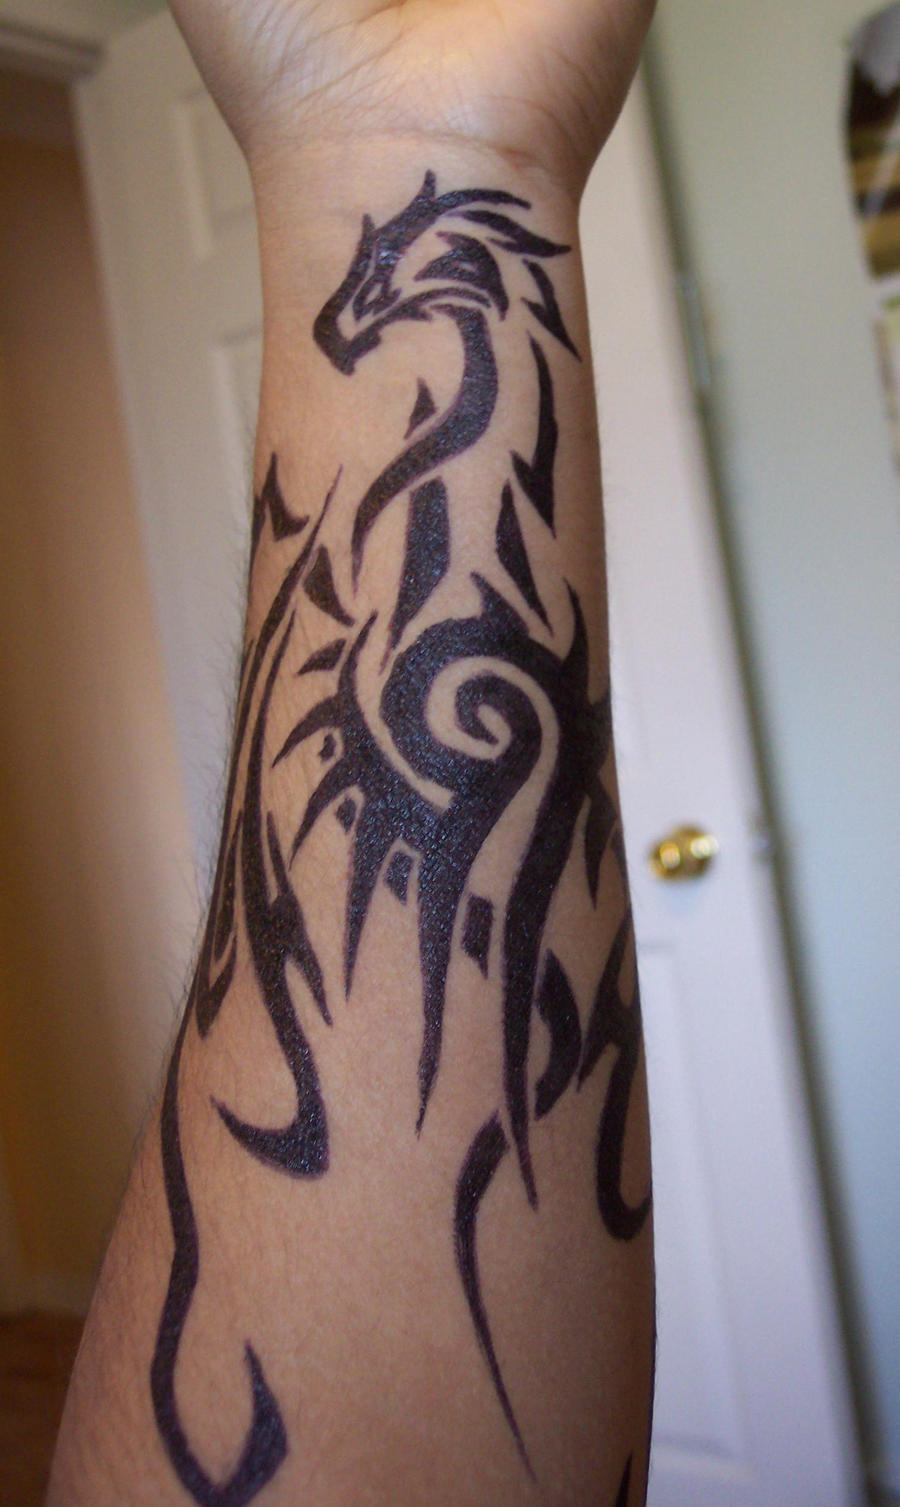 there's a dragon on my forearm